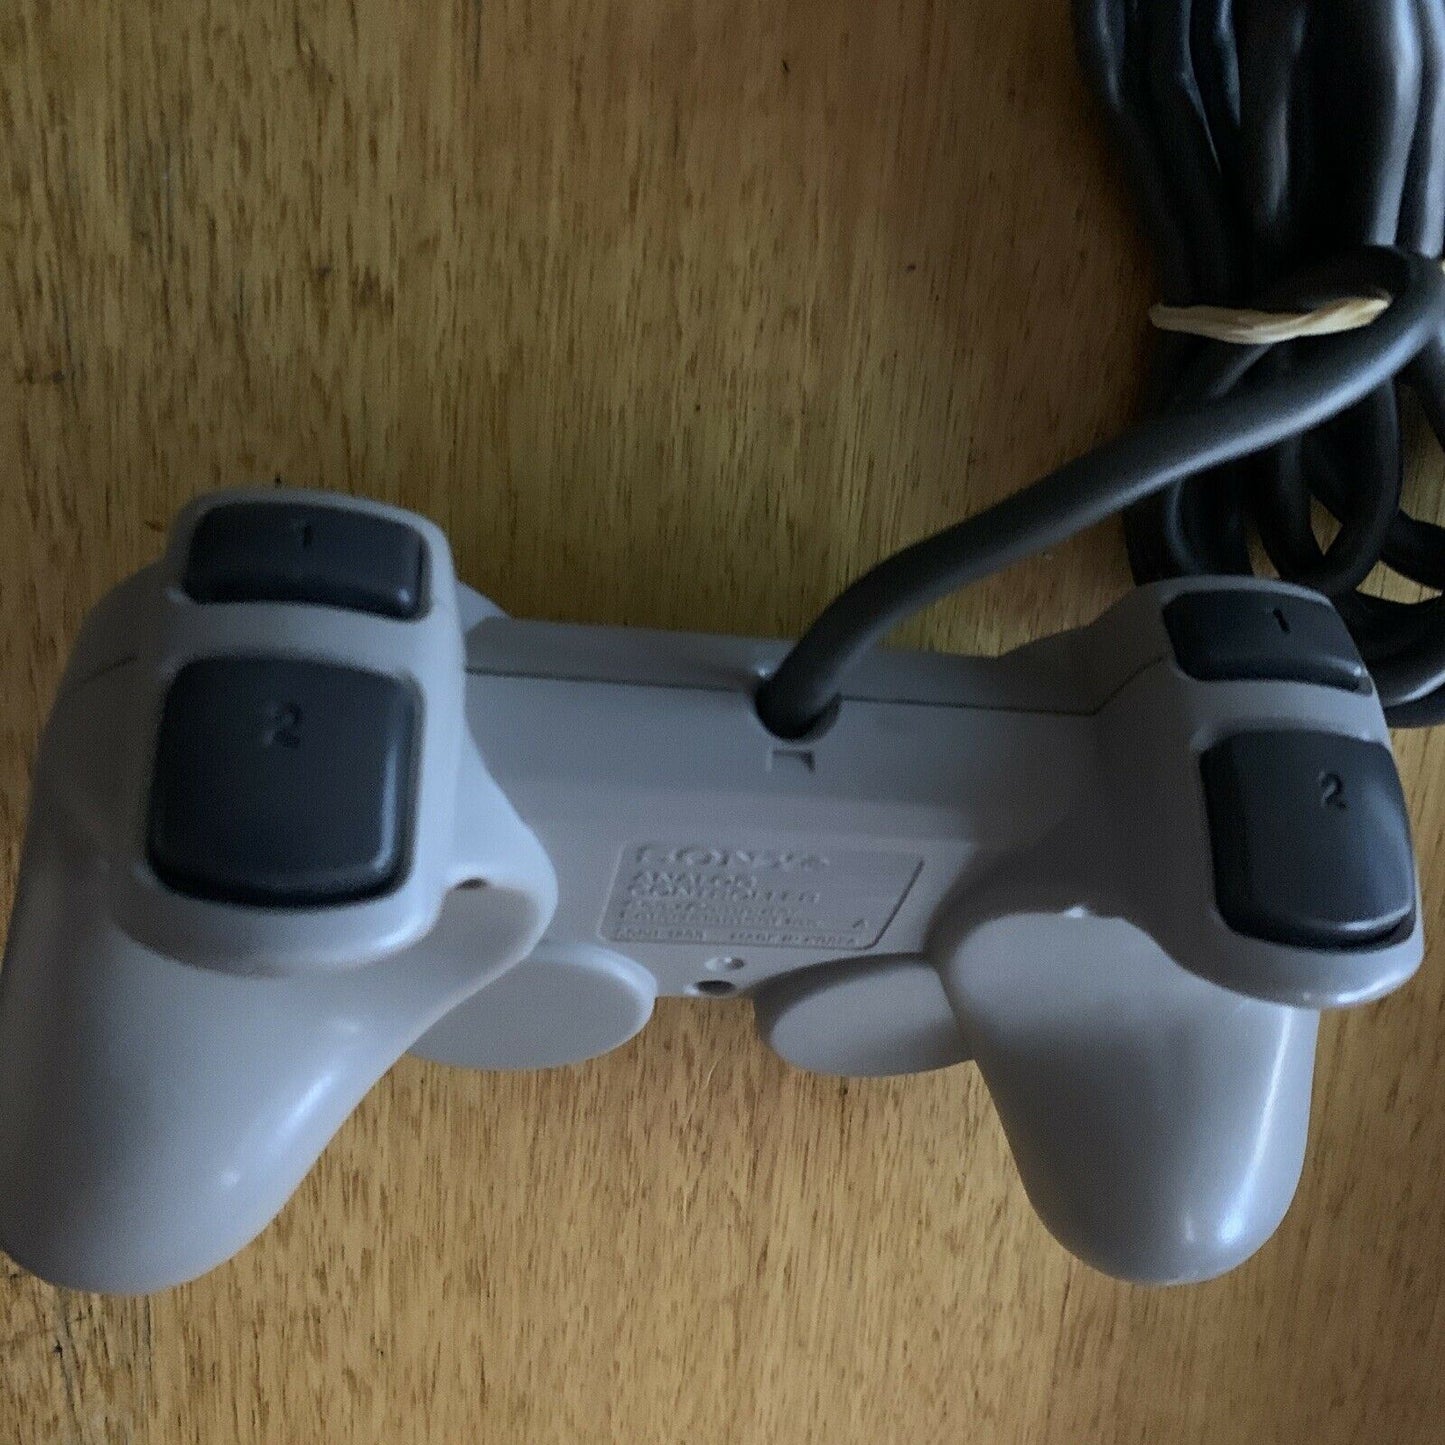 Genuine Sony PlayStation 1 CONTROLLER Grey Analog Dual Shock PS1 SCPH-1200